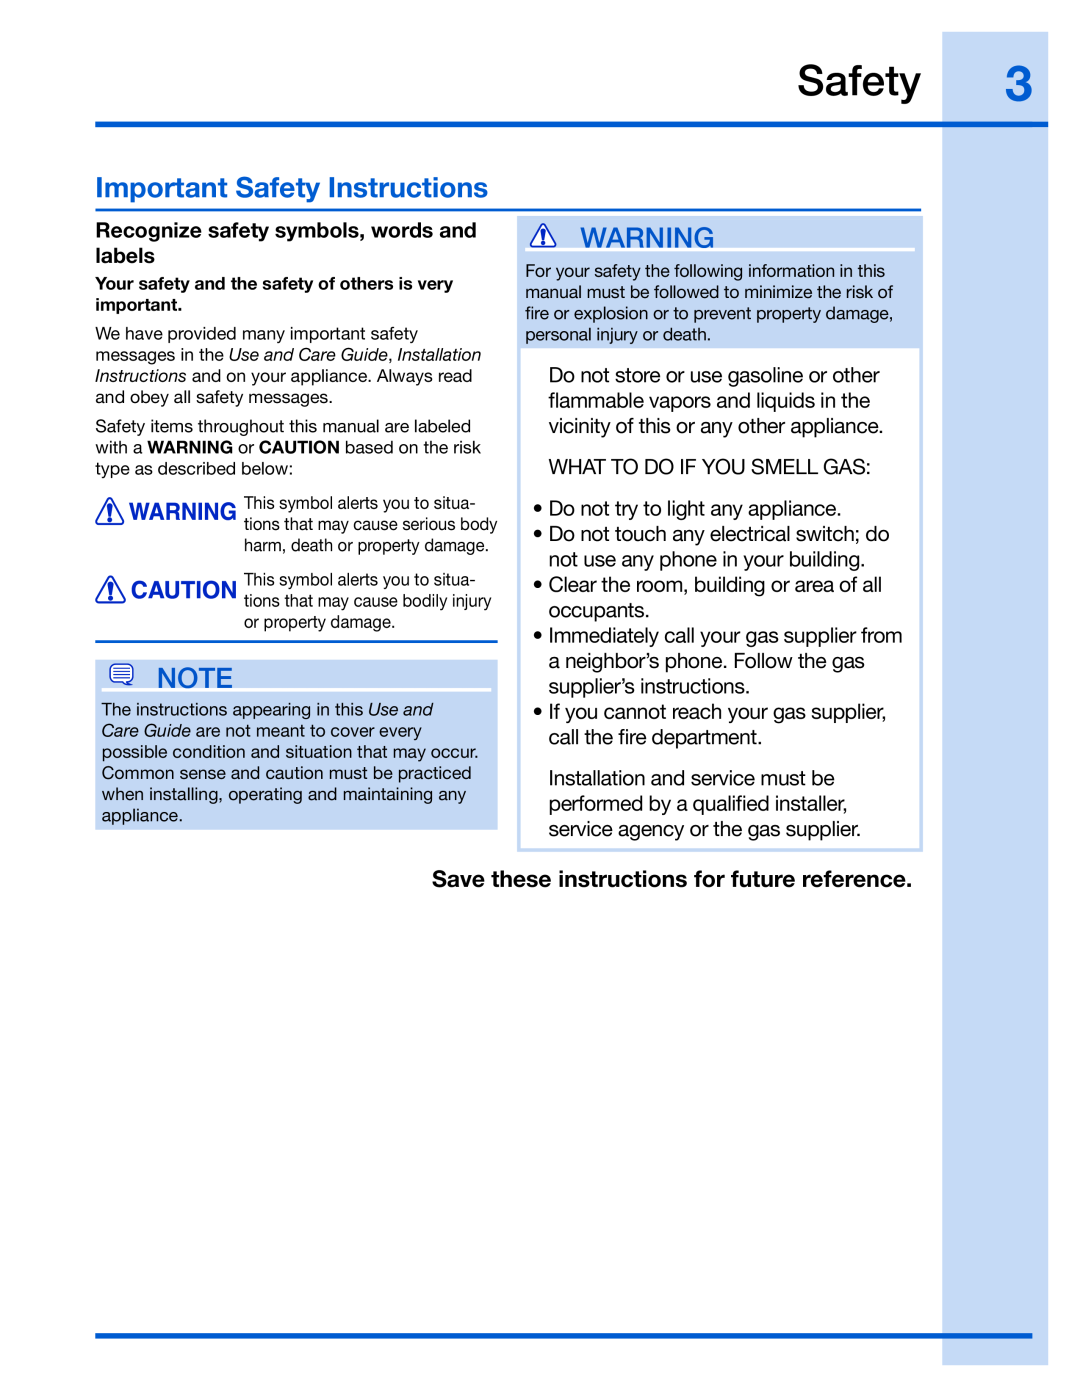 Electrolux 137023200 A manual Important Safety Instructions, Recognize safety symbols, words and, labels 